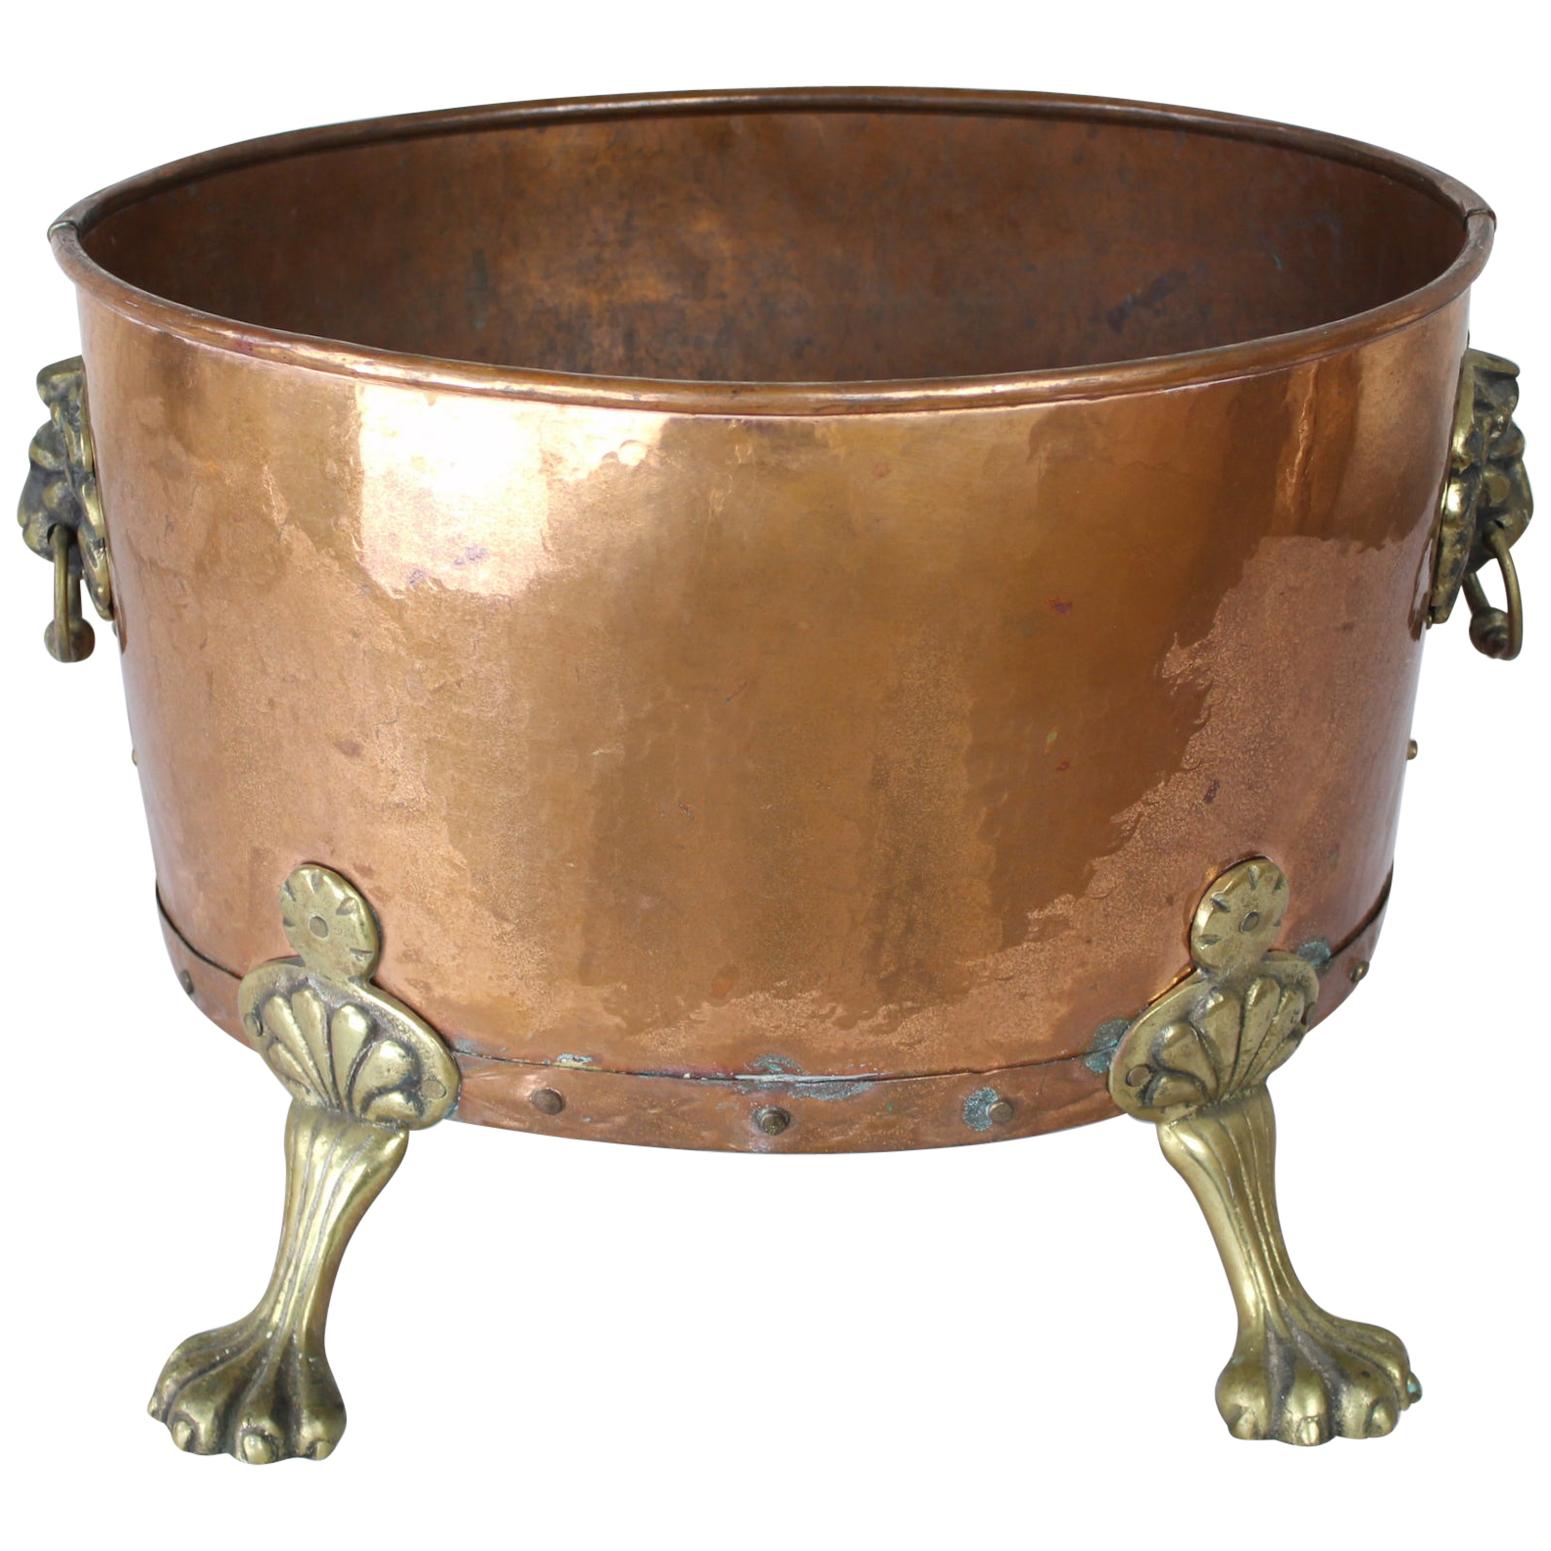 Antique English Copper Log Bin with Brass Claw Feet and Lion's Heads